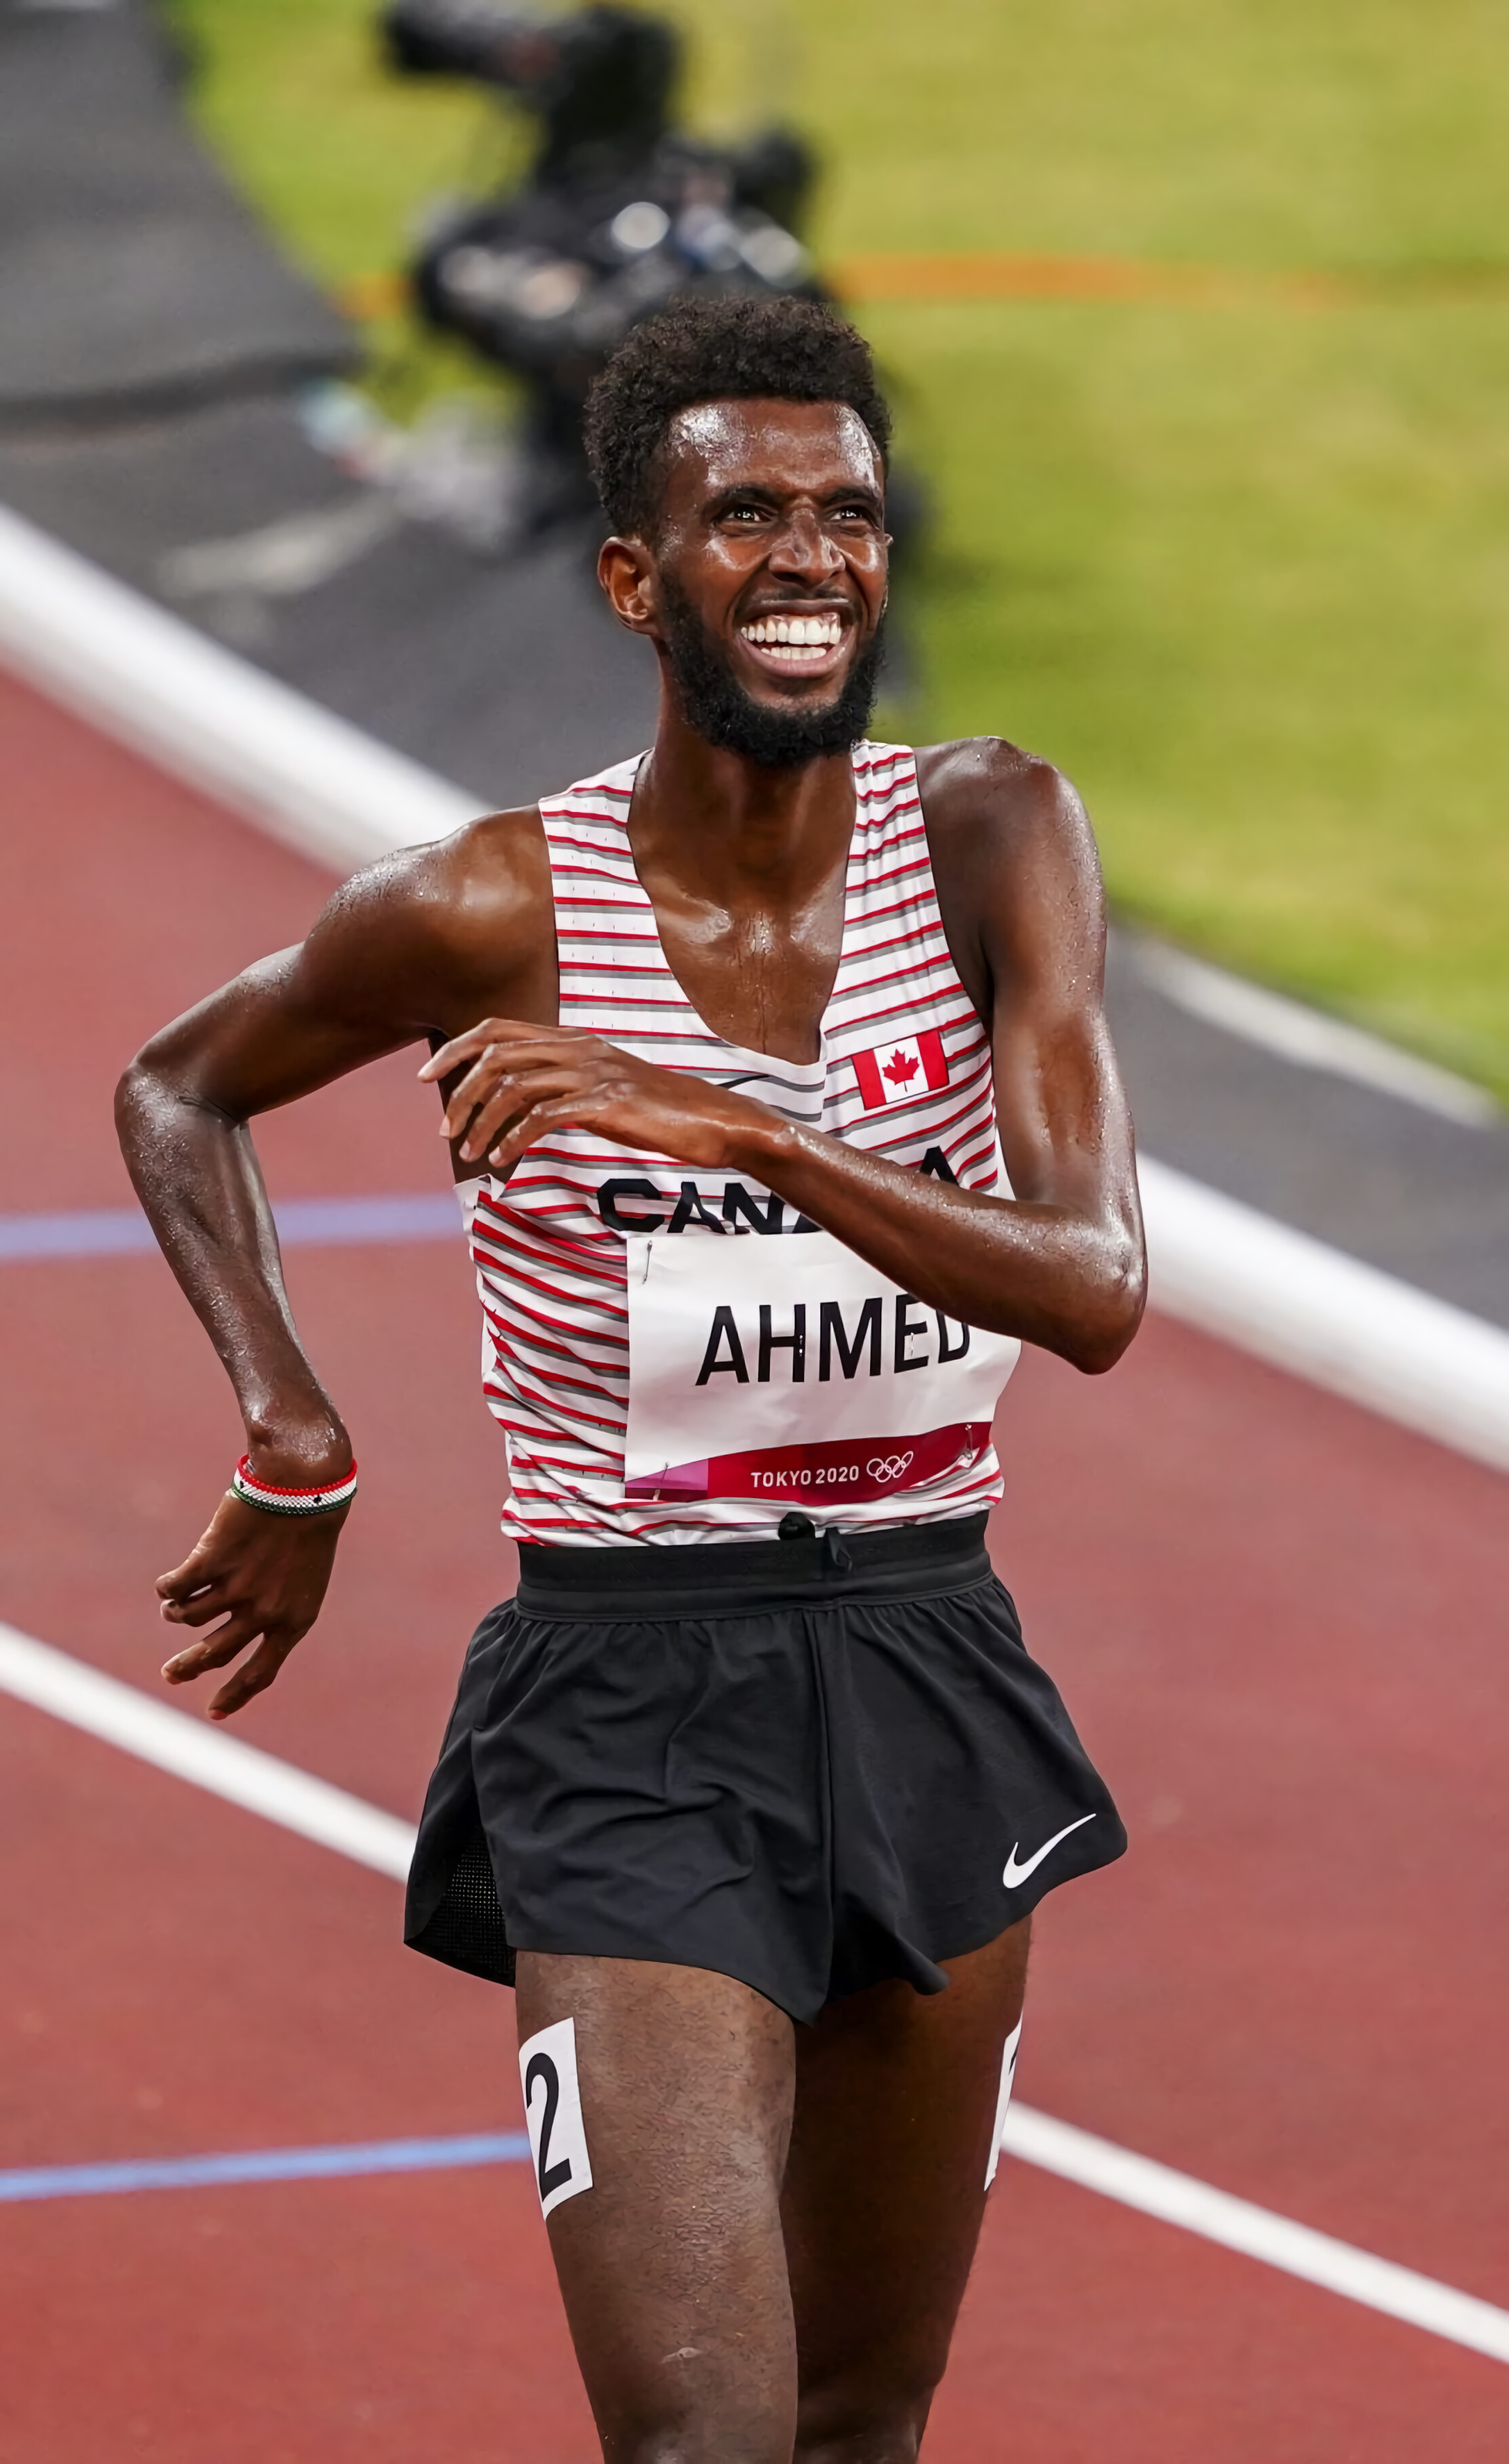 Mohammed Ahmed, Personal records, Breaking barriers, Athlete's journey, 2230x3640 HD Phone